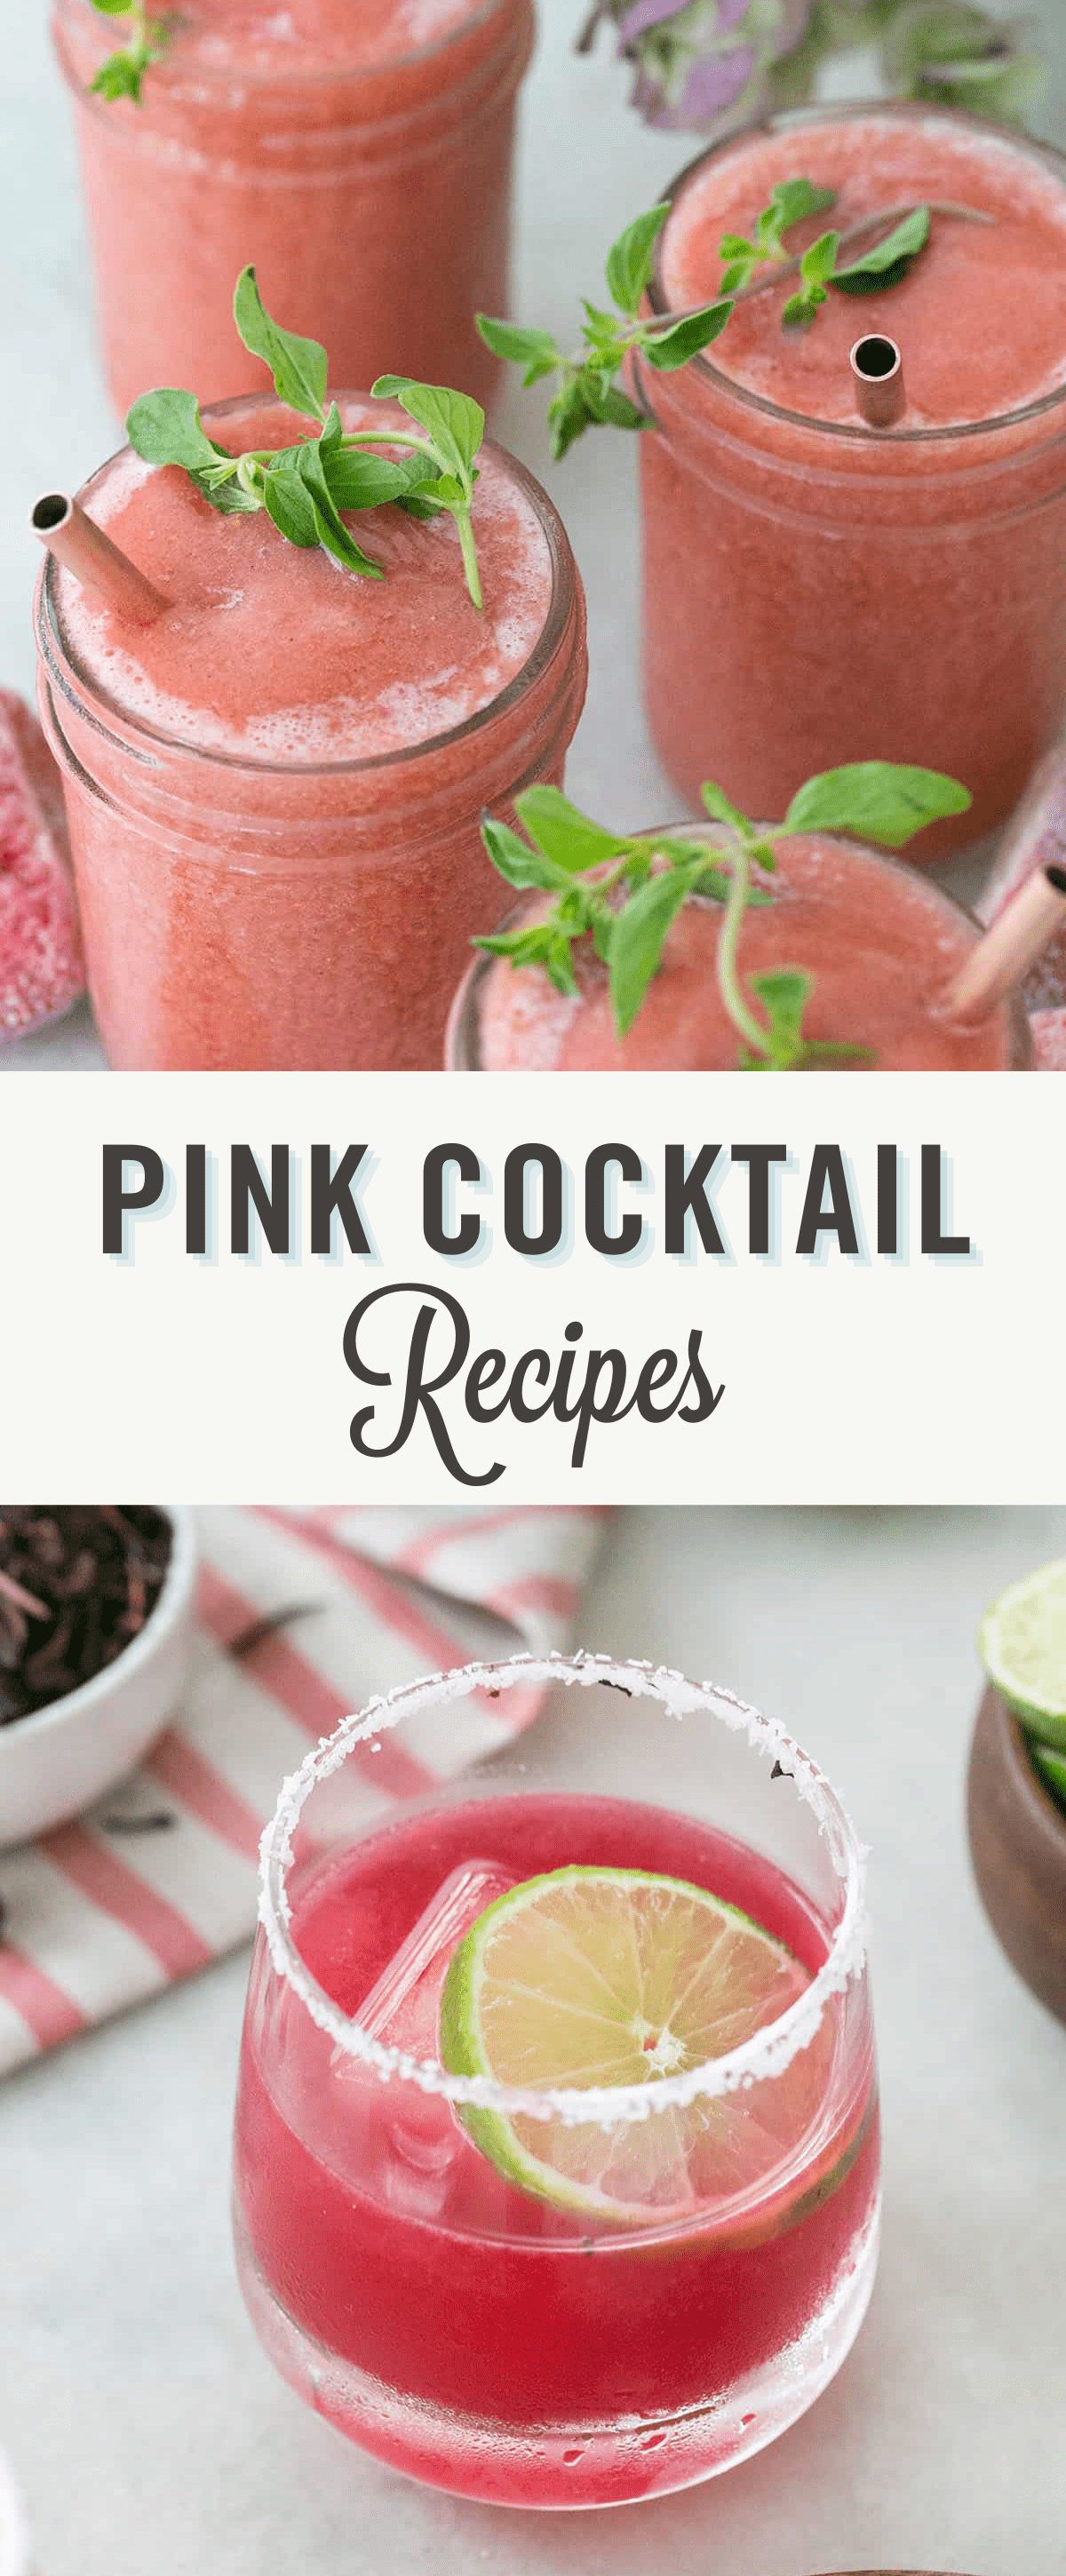 Pink cocktail recipes.